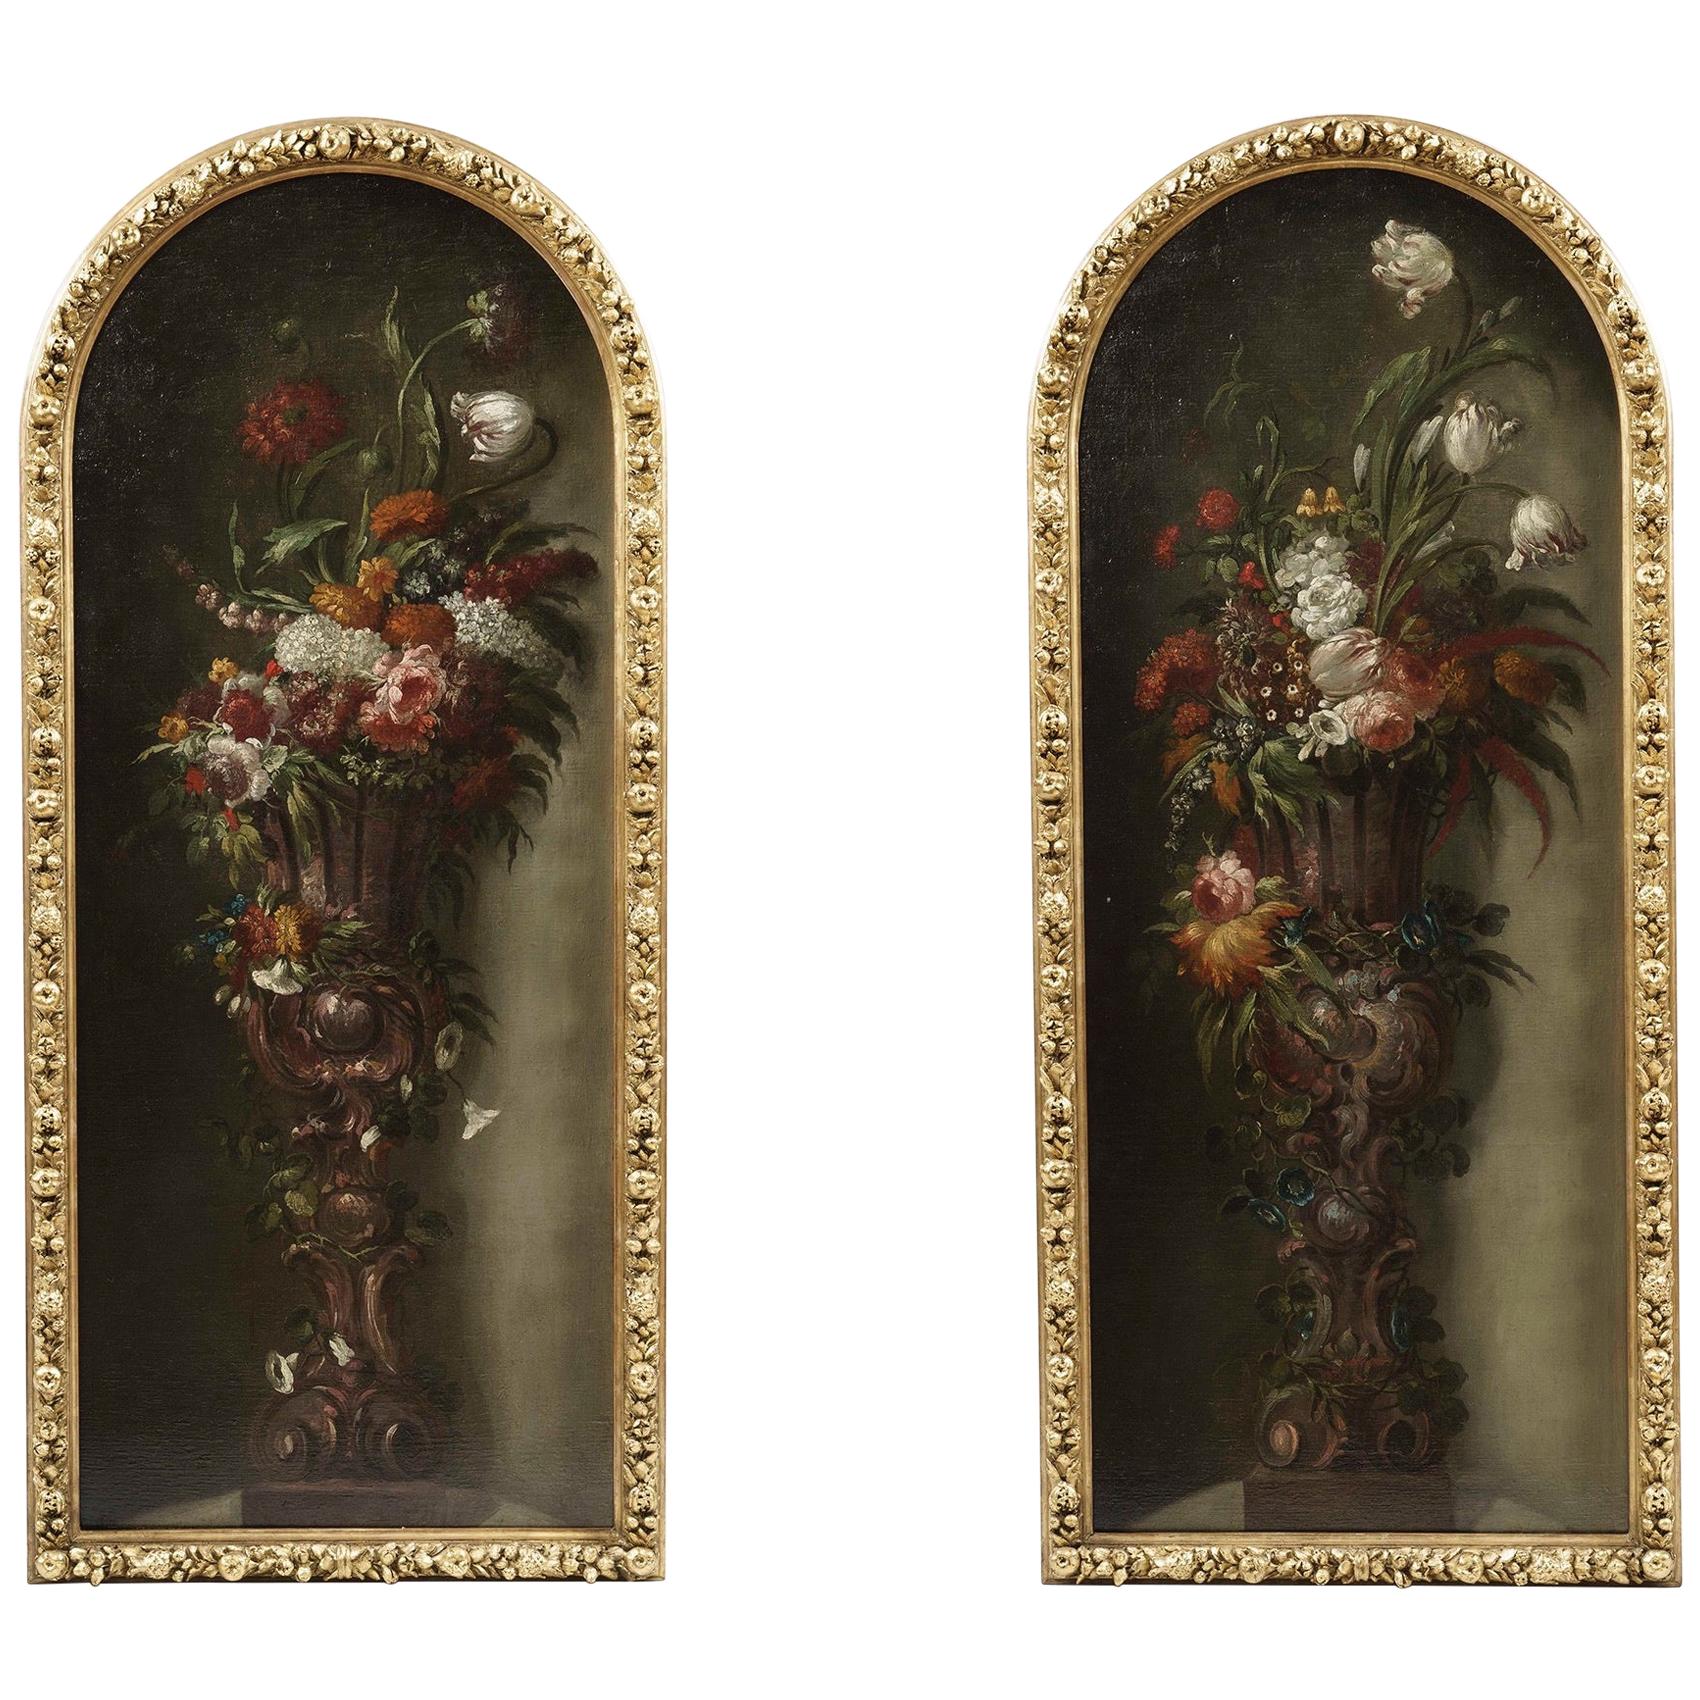 Pair of 19th Century Still-Life Paintings of Flower Bouquets in Vases